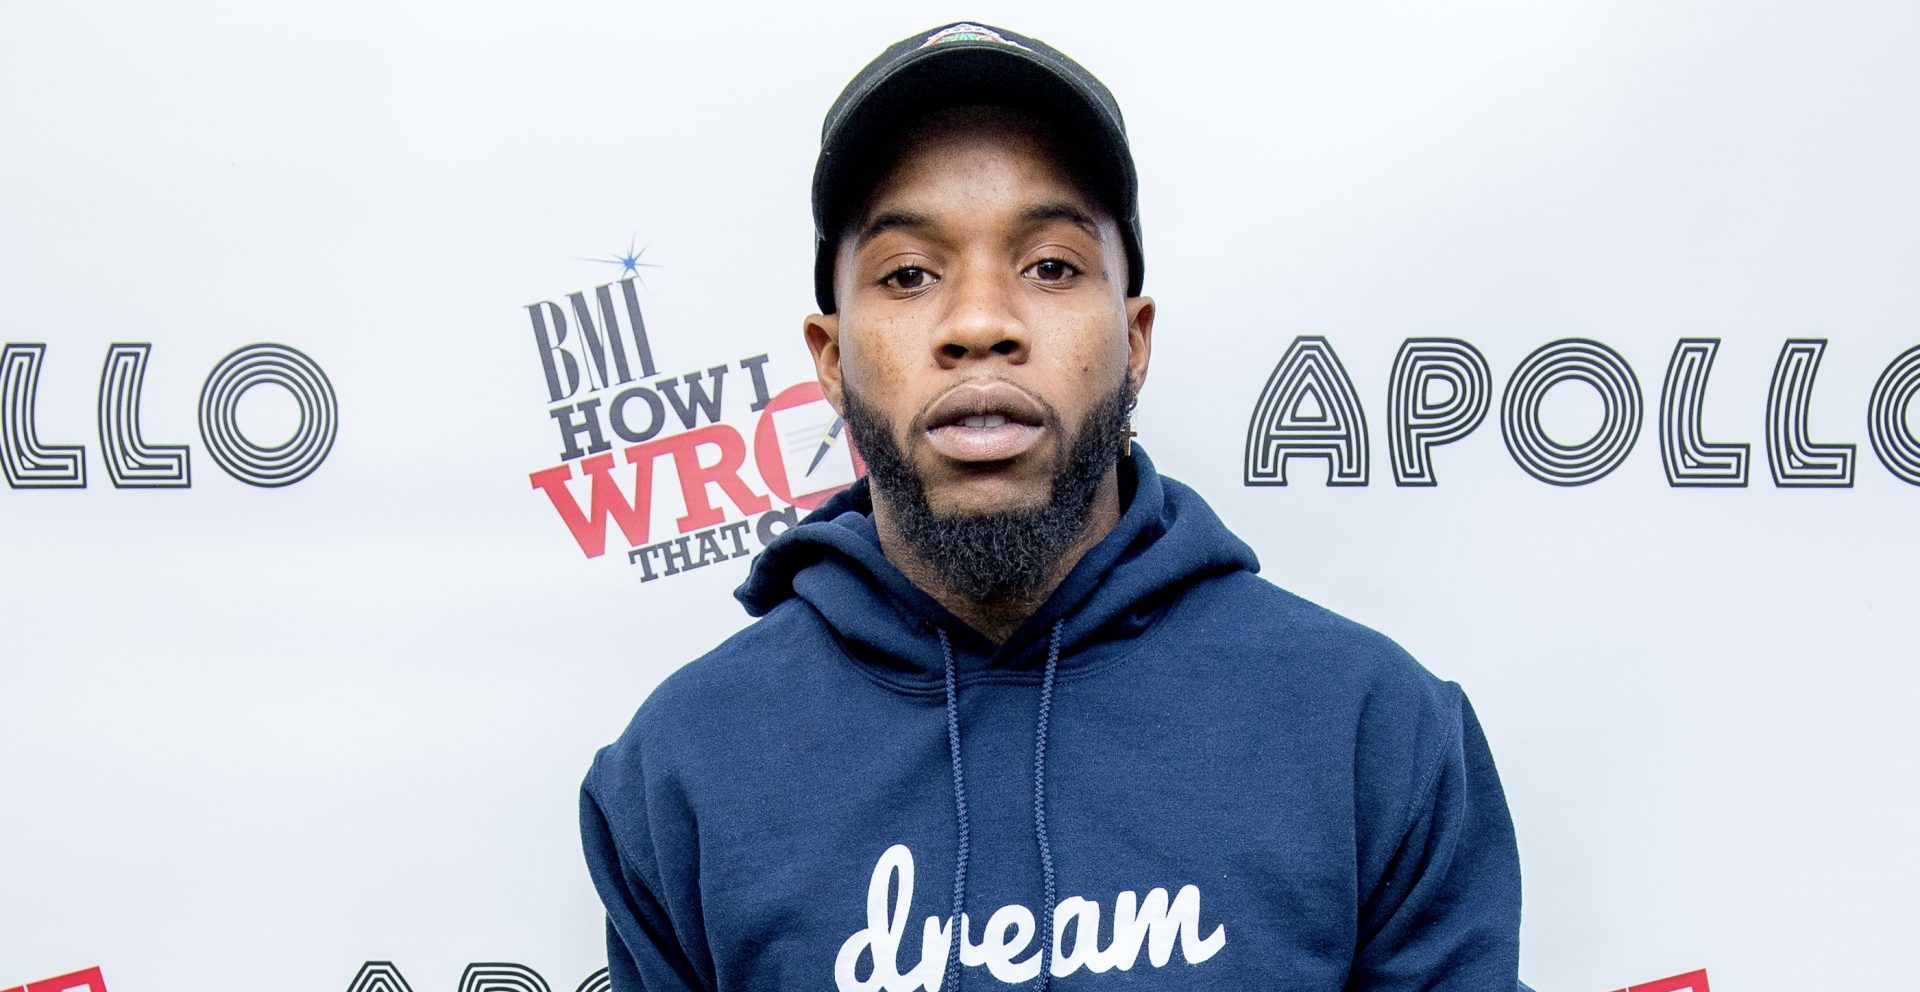 Tory Lanez Releases Statement Maintaining His Innocence: 'I Refuse To Apologize For Something That I Did Not Do'